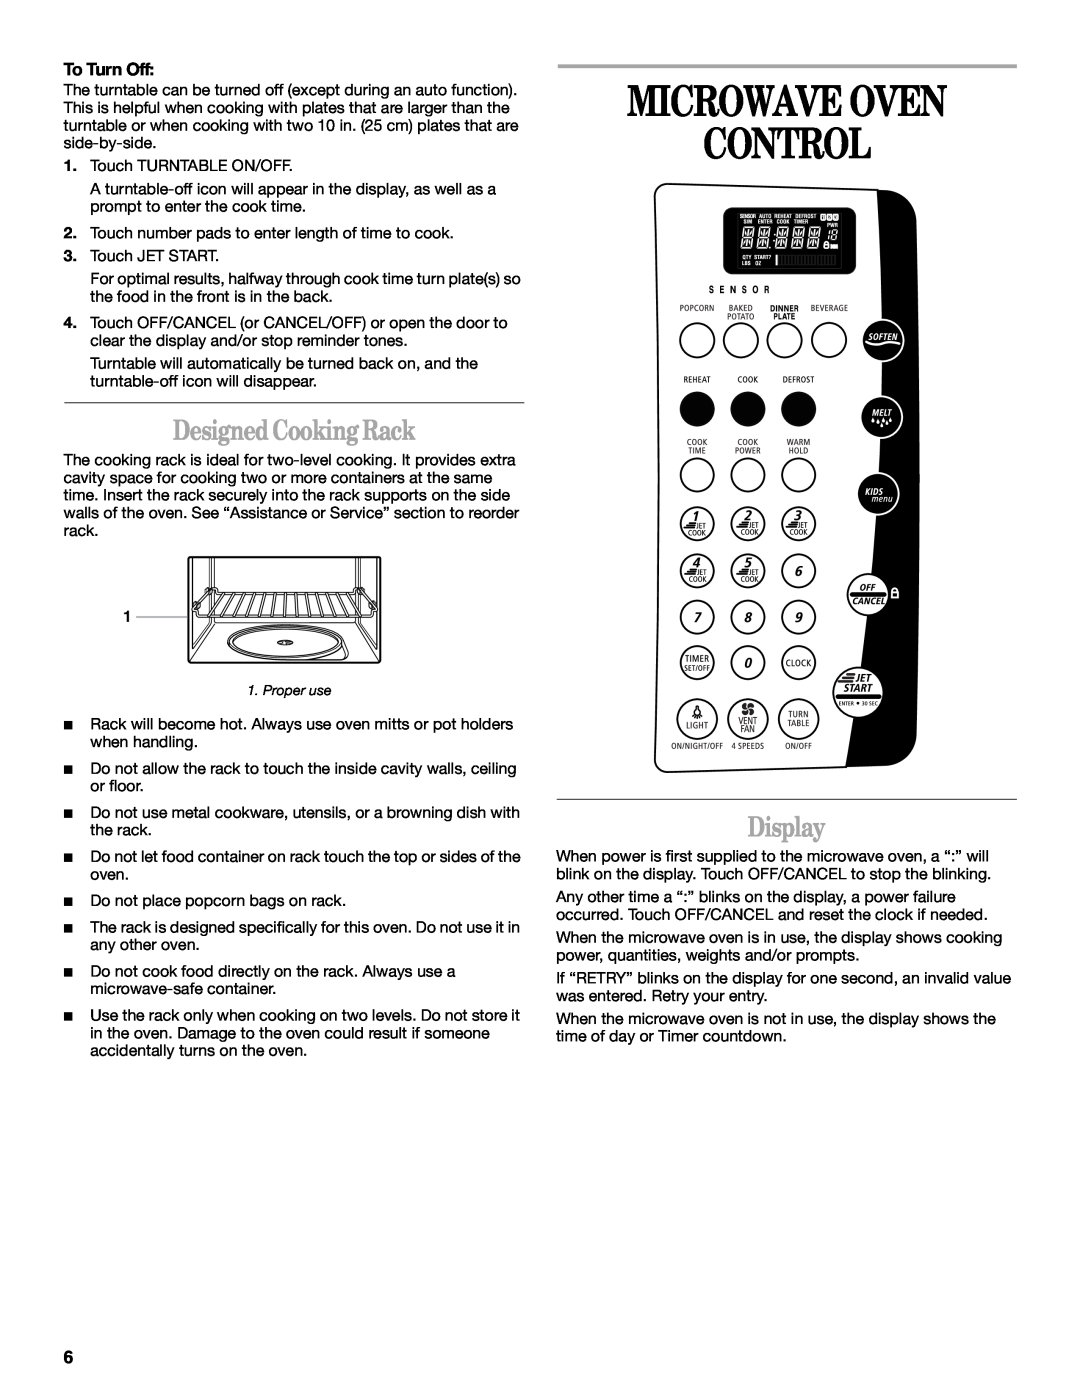 Whirlpool GH9184XL manual Microwave Oven Control, DesignedCooking Rack, Display, To Turn Off 